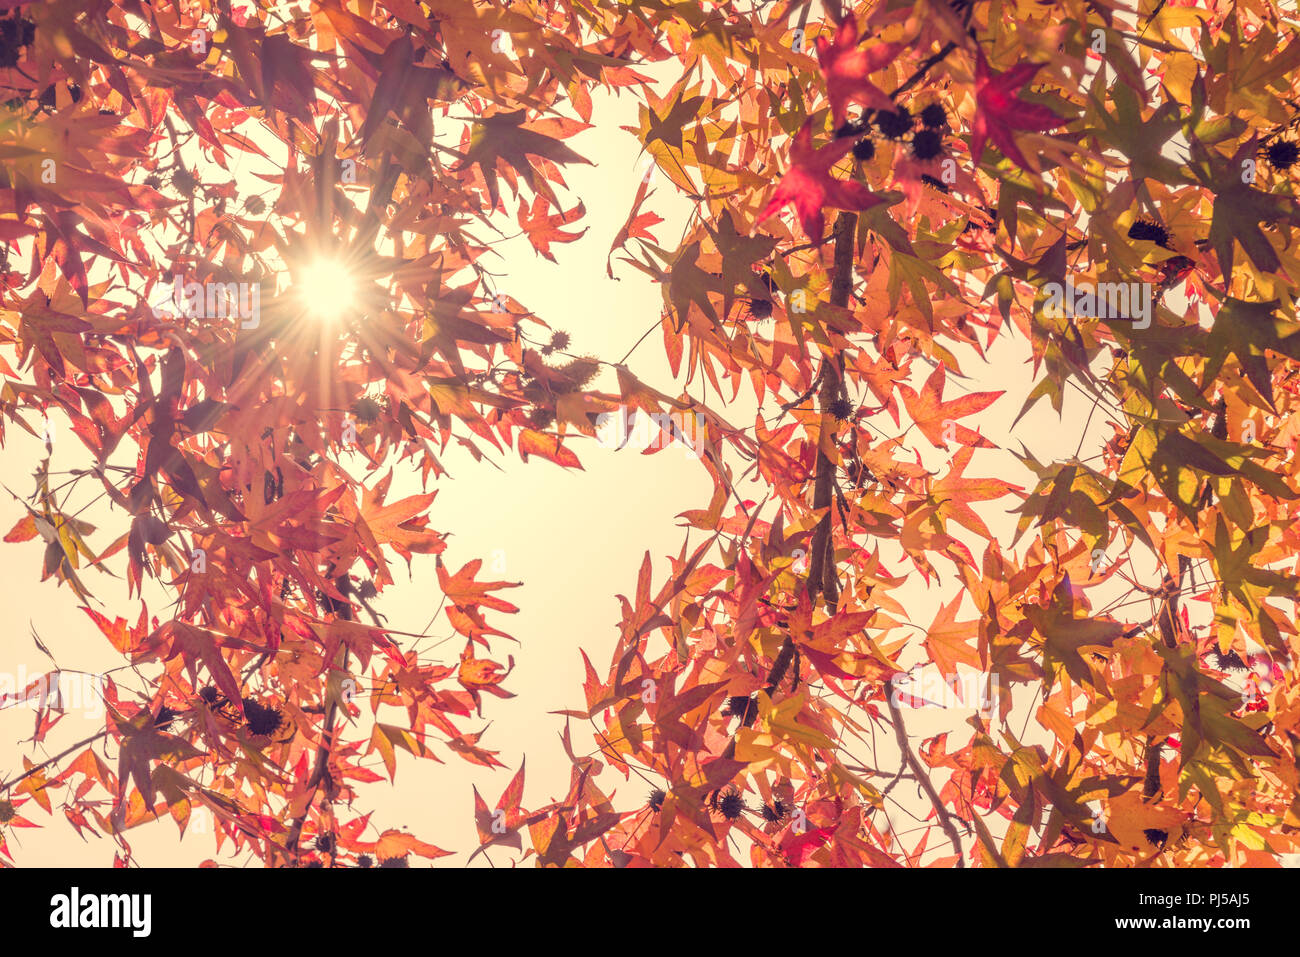 Autumn maple leaves with sunbeam, looking up in a forest in autumn, vintage process Stock Photo